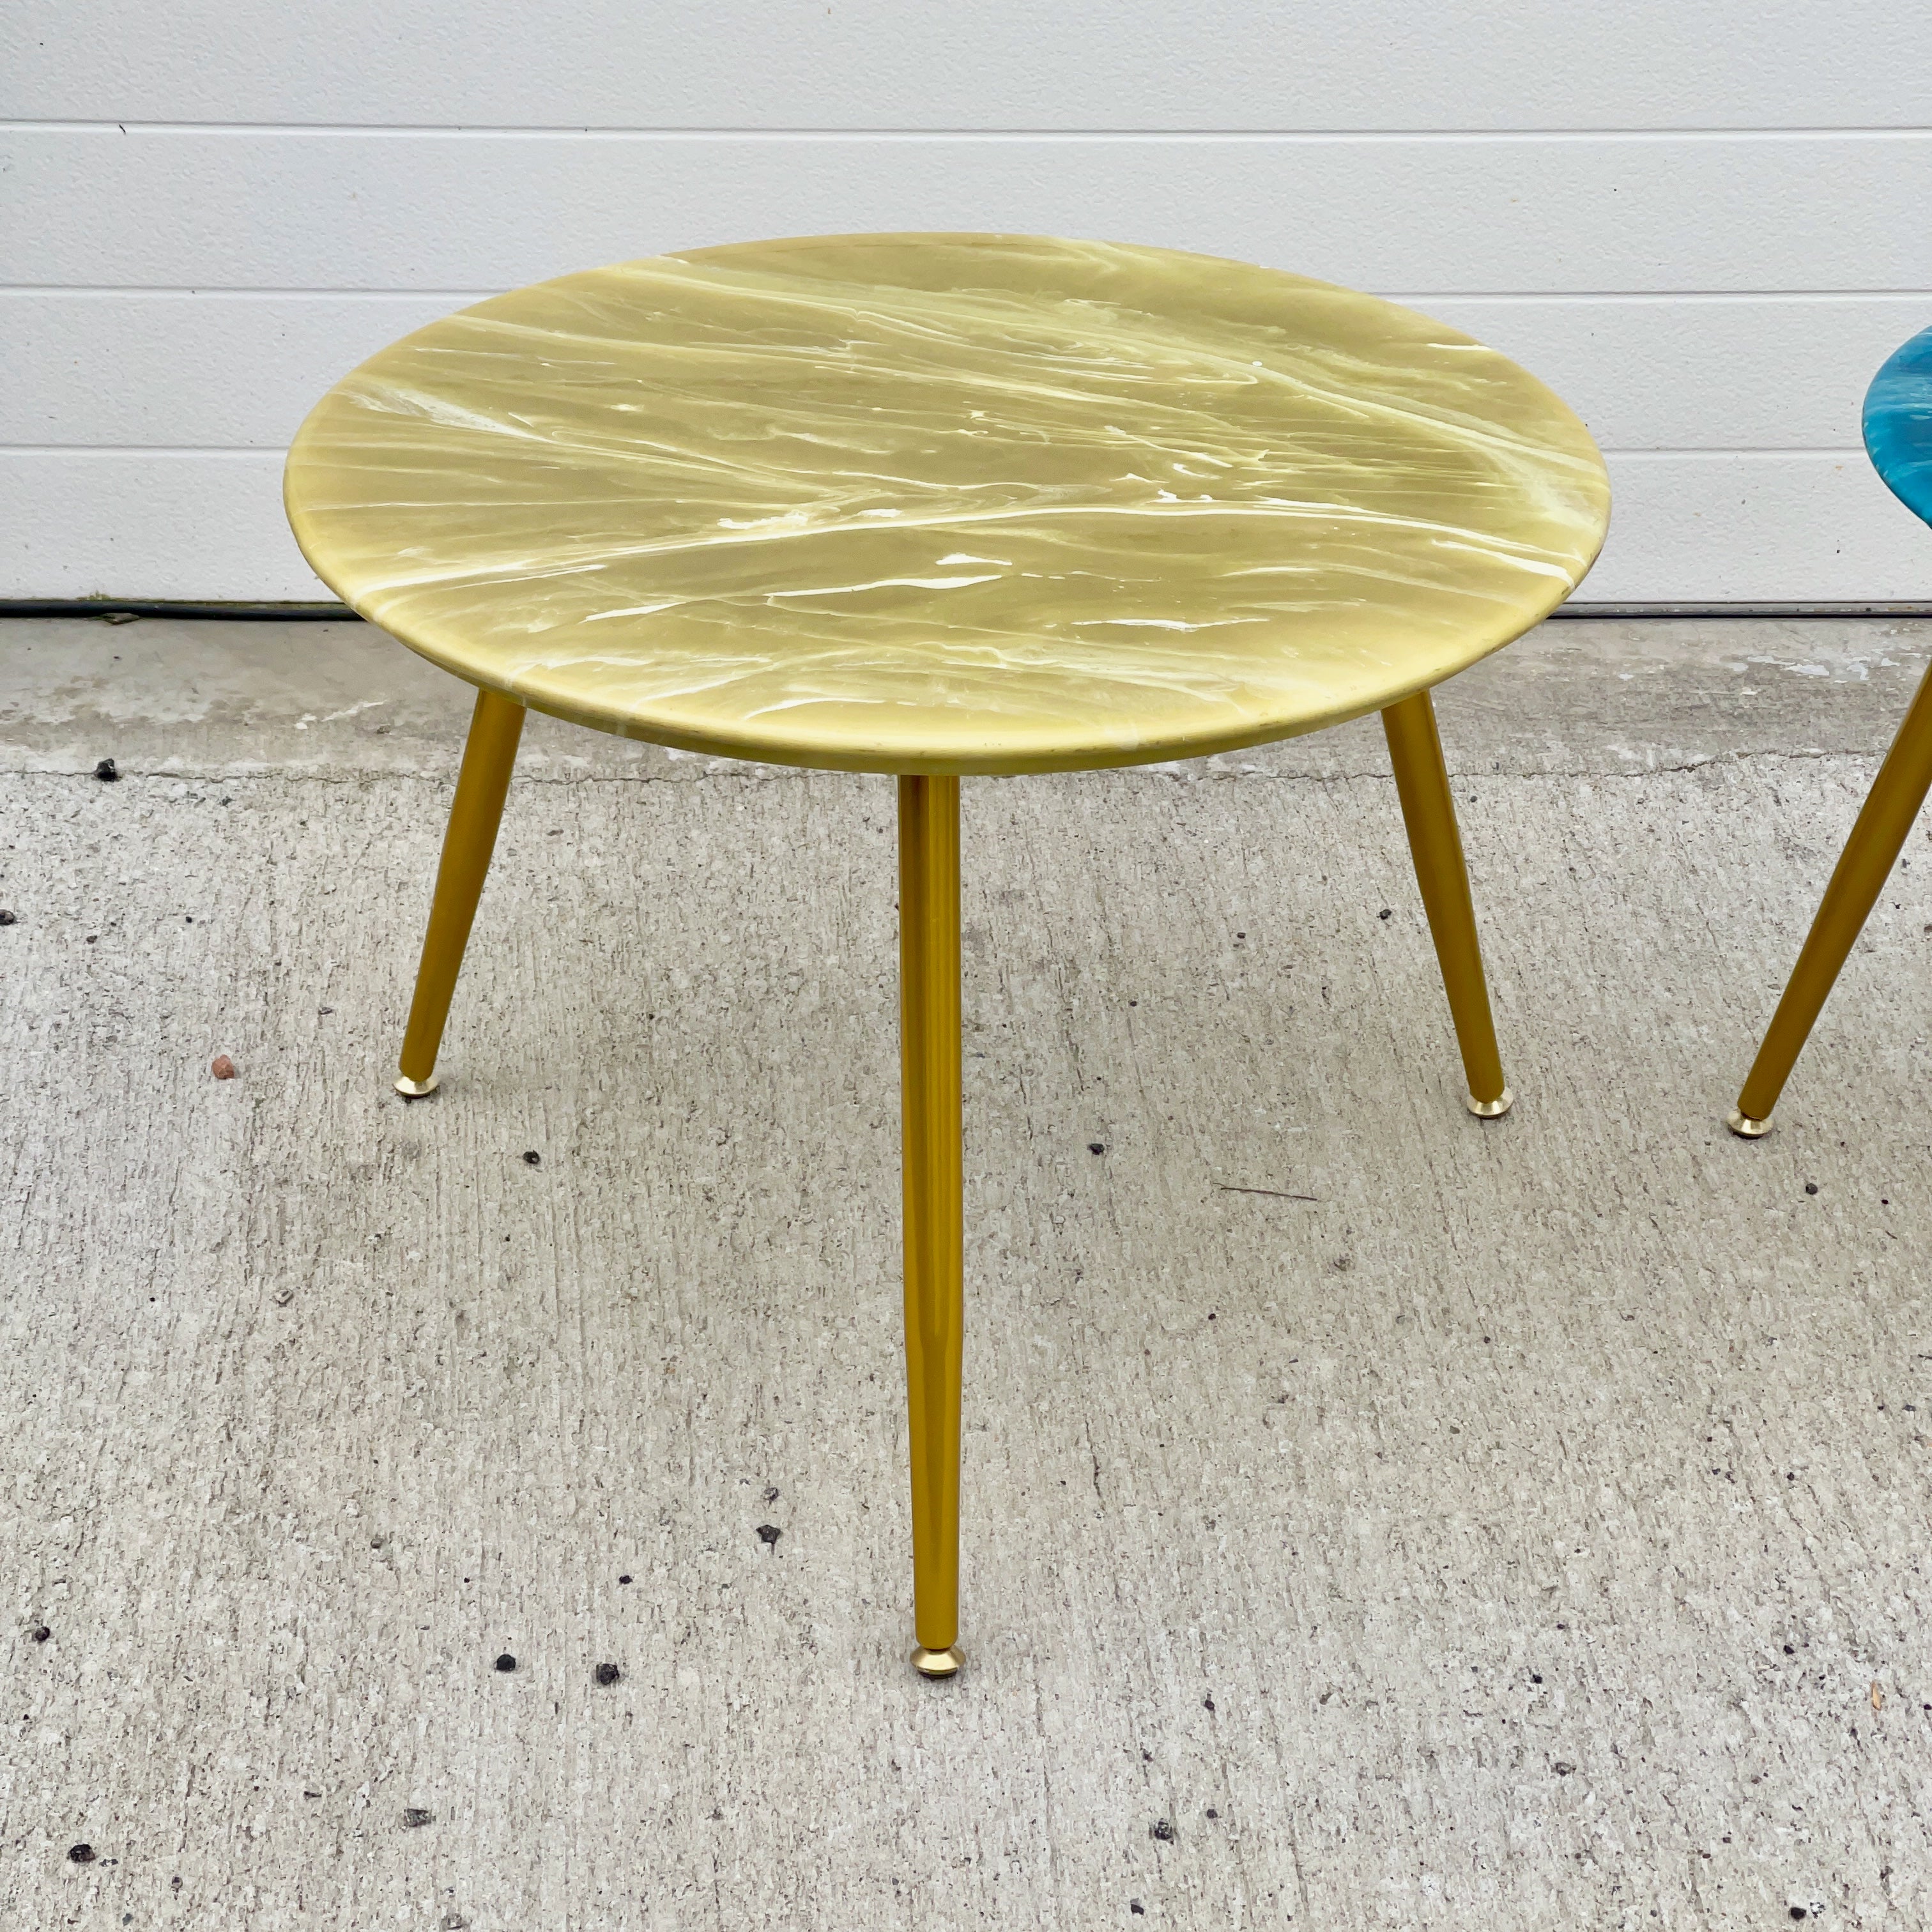 Three legged round top table consisting of a 23 inch diameter simulated onyx resin top by MarbleCraft on three 16 inch tapered brass-tone legs with self-leveling feet.
Both the top and the legs are New Old Stock (NOS) from 1963 and have never been